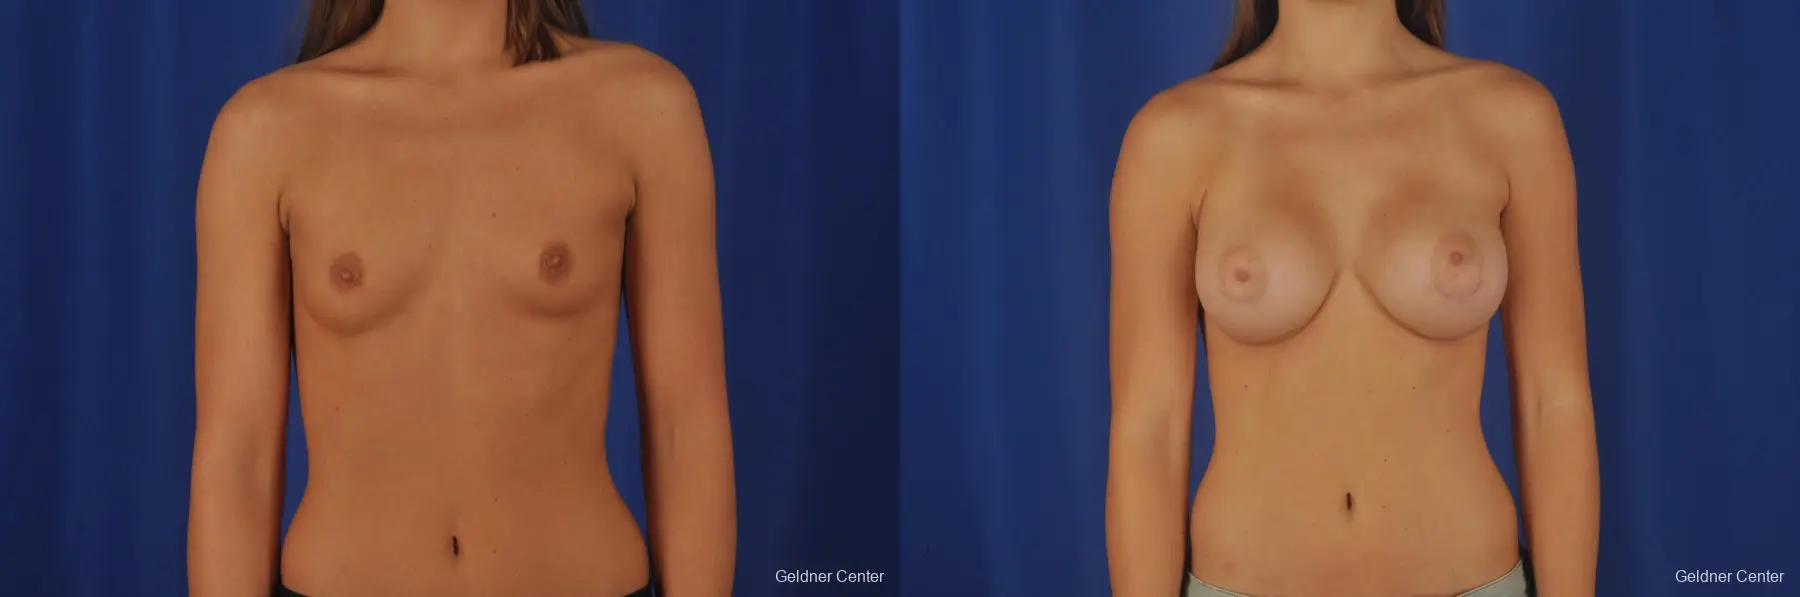 Breast Augmentation Streeterville, Chicago 3231 - Before and After 1